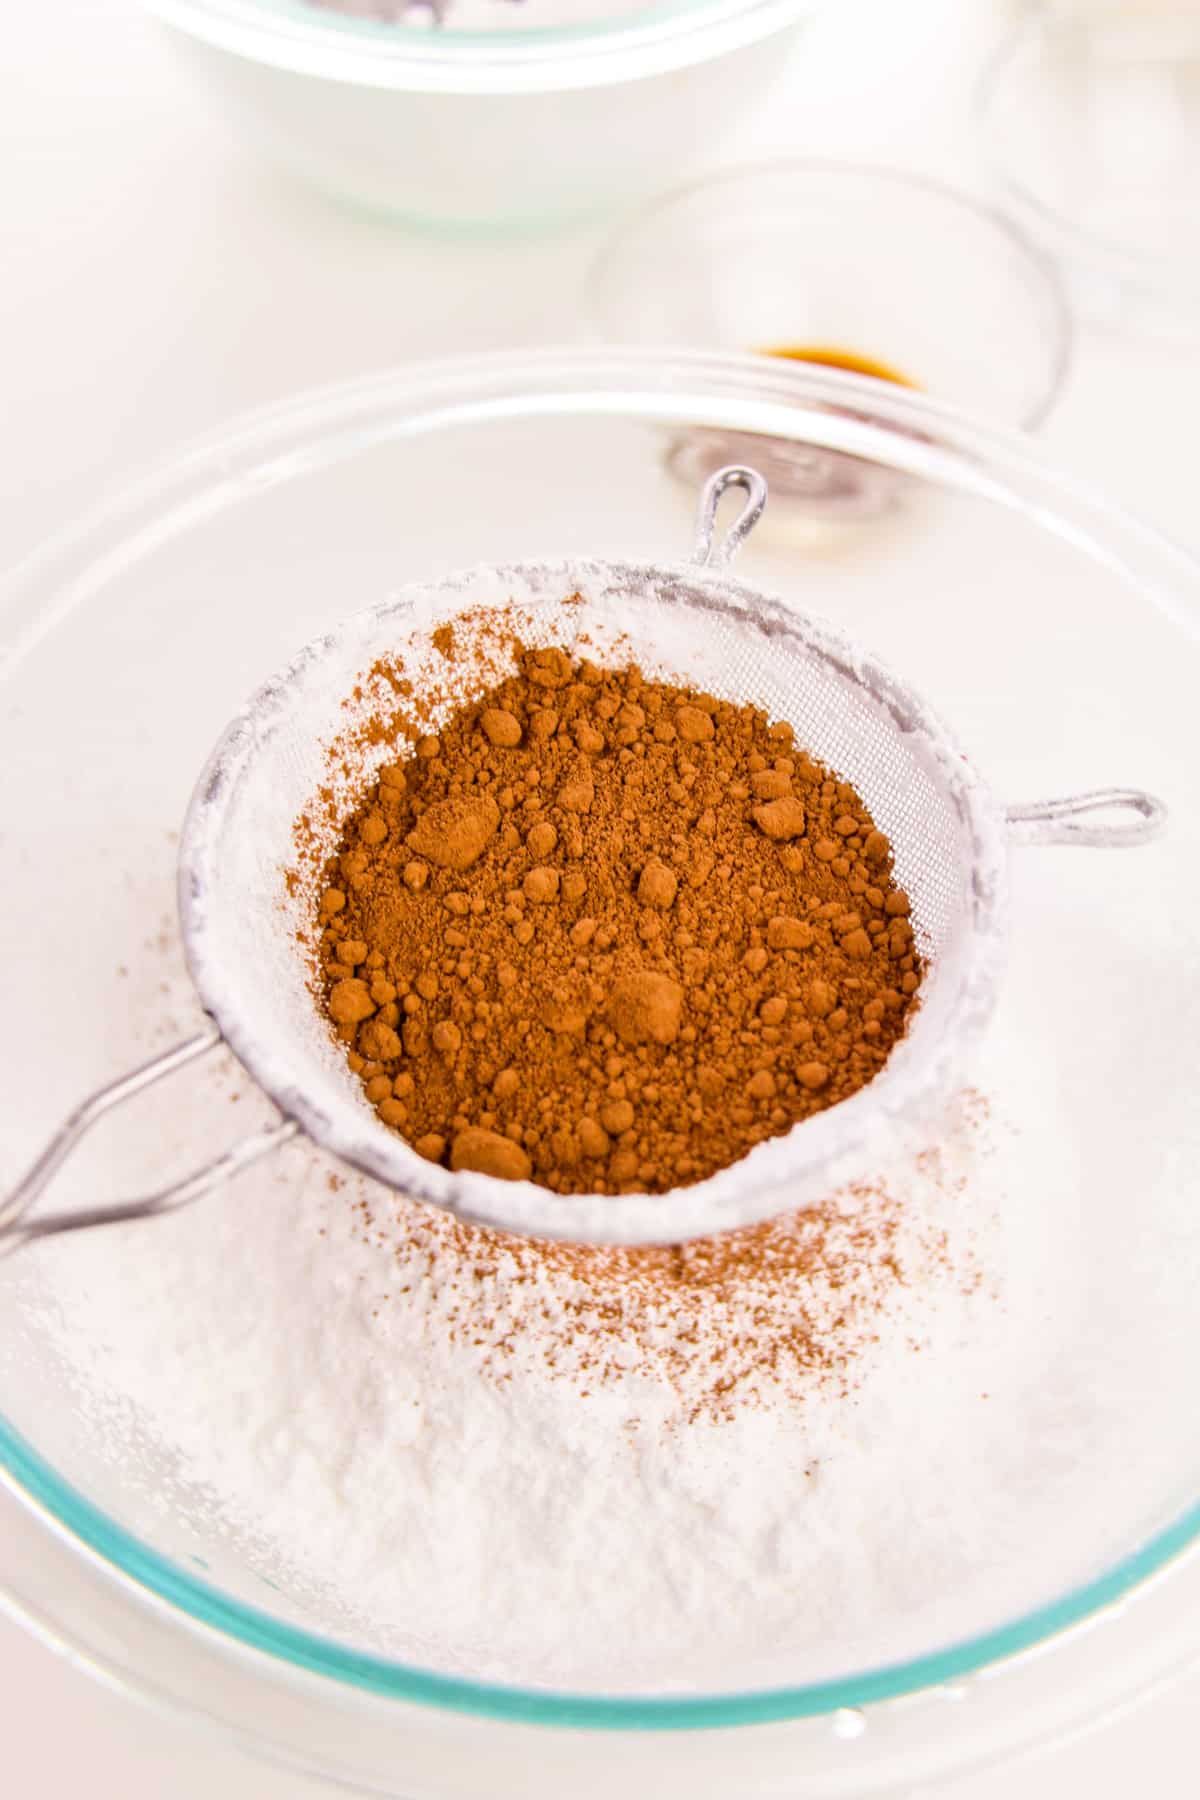 Cocoa powder being sifted into glass bowl of powdered sugar